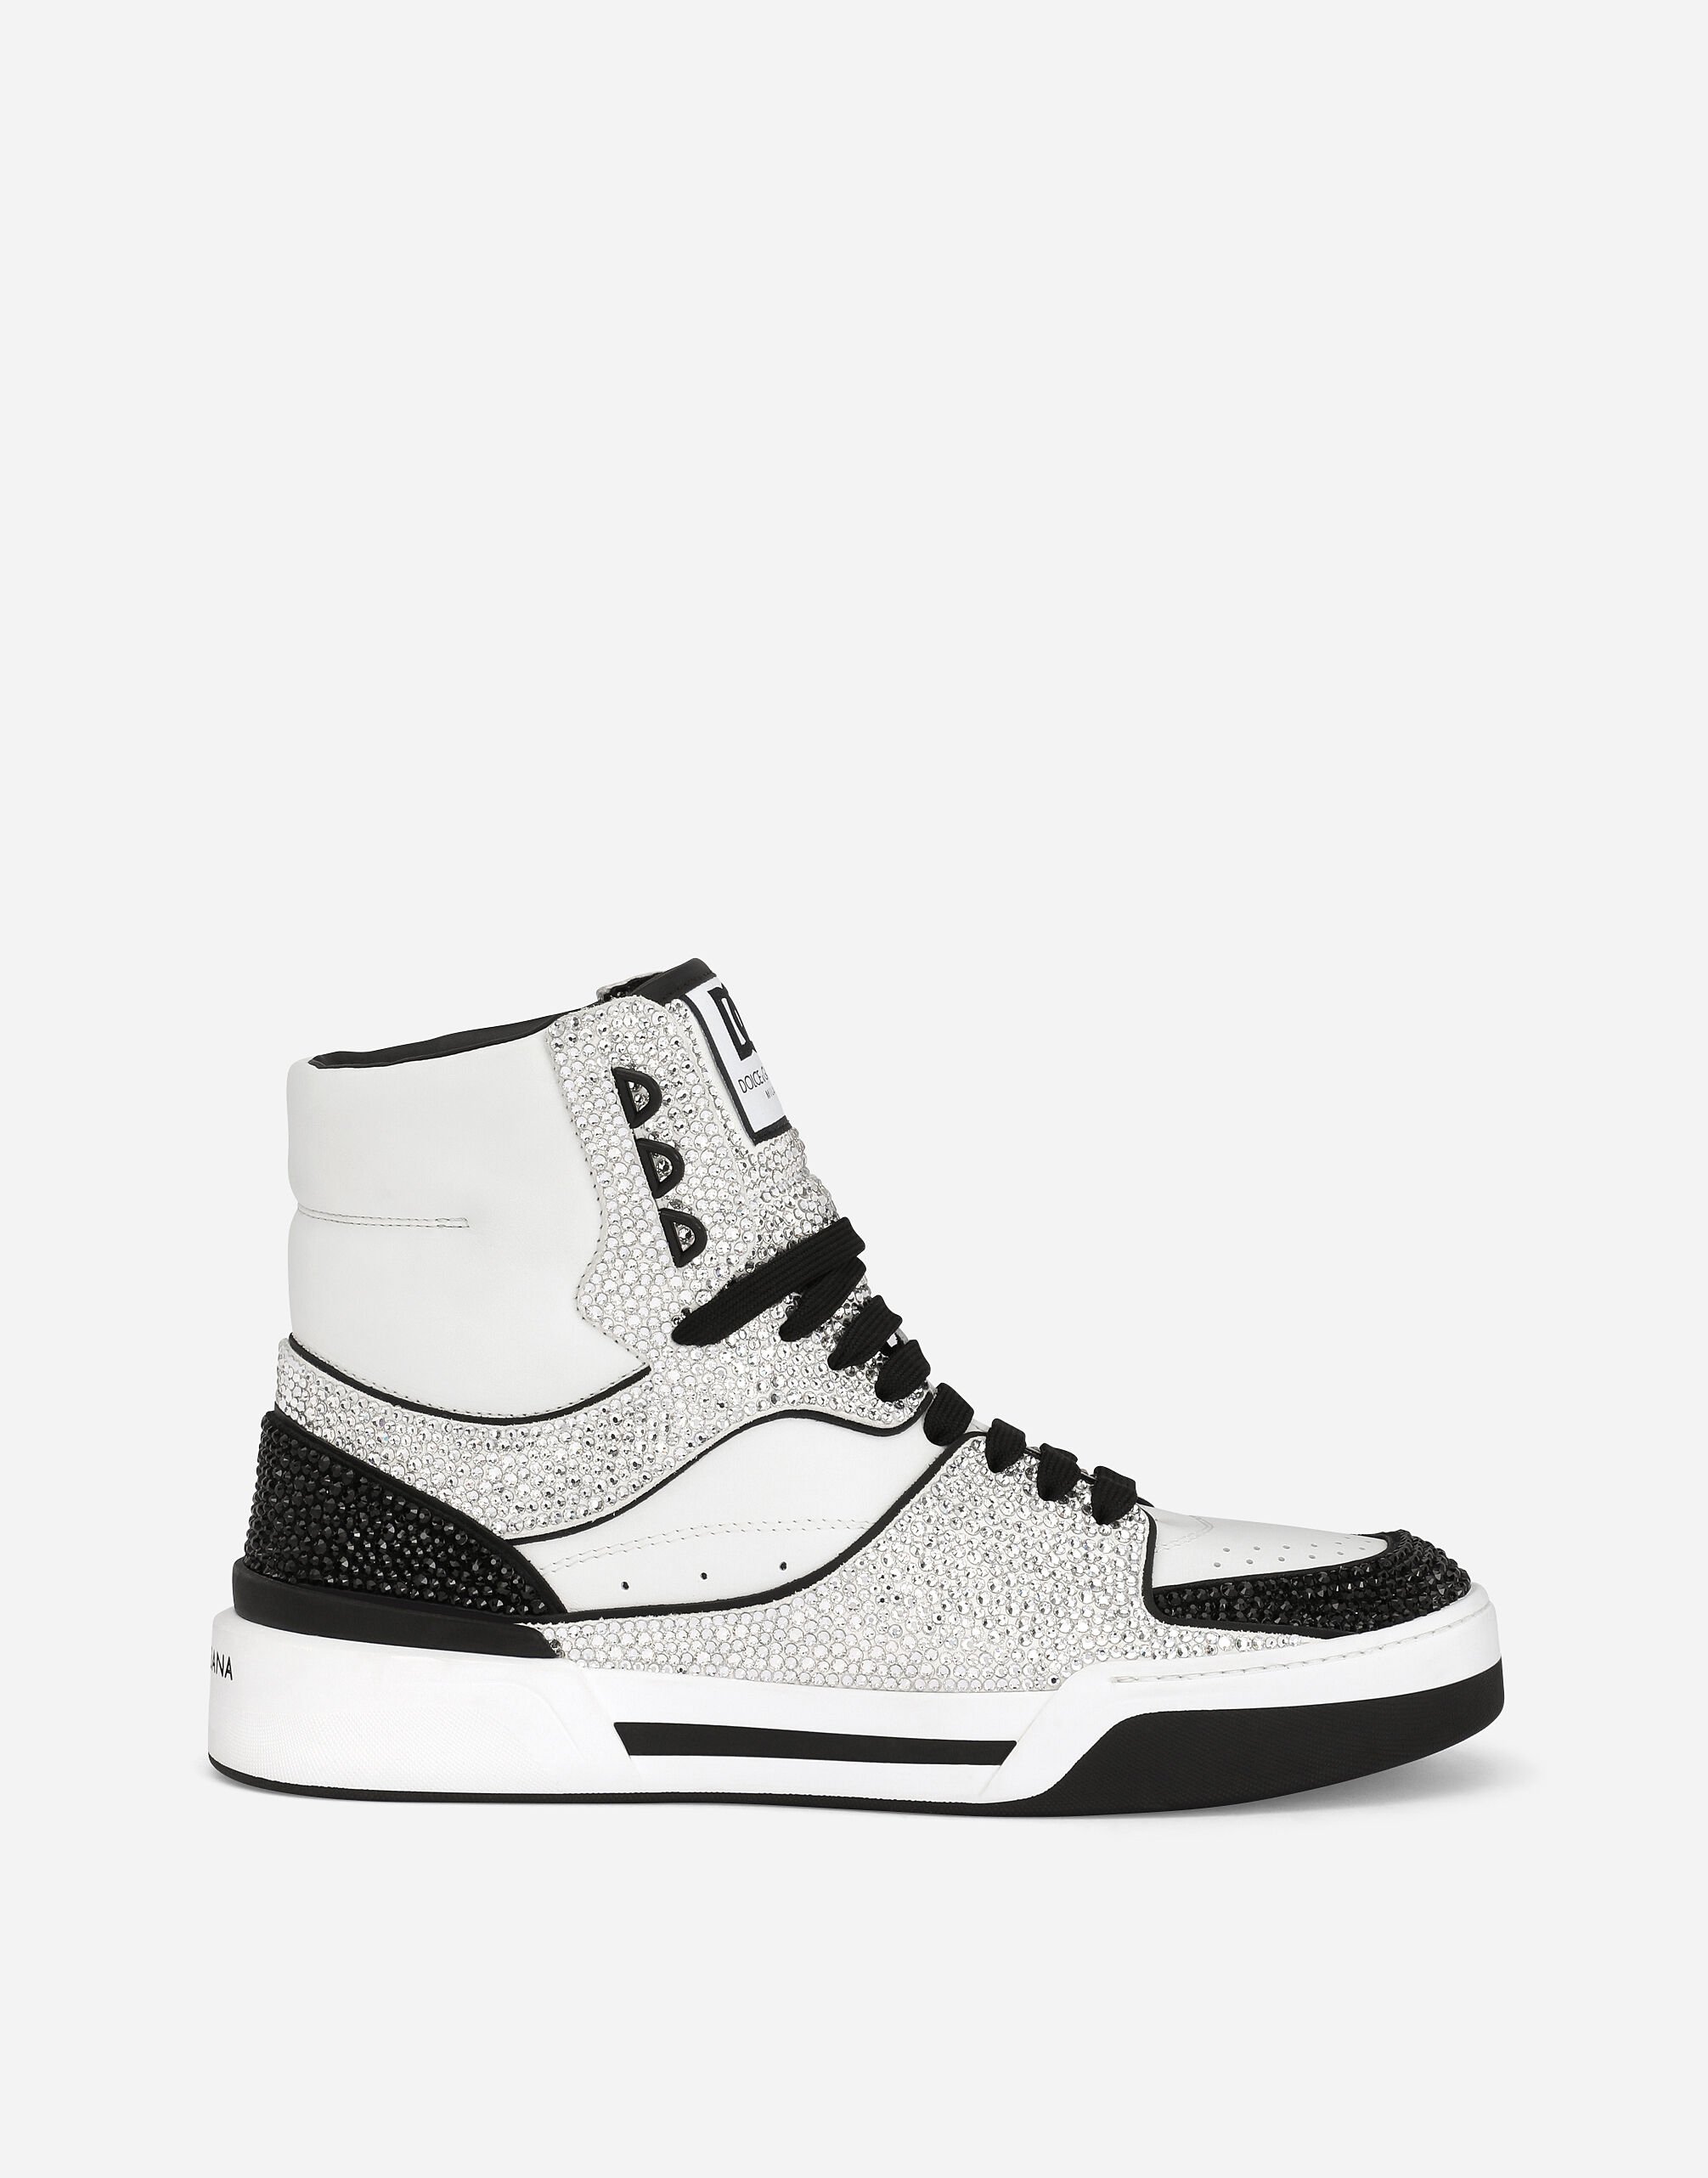 Dolce & Gabbana Calfskin New Roma high-top sneakers with fusible rhinestones Black/Silver CS1863AO223